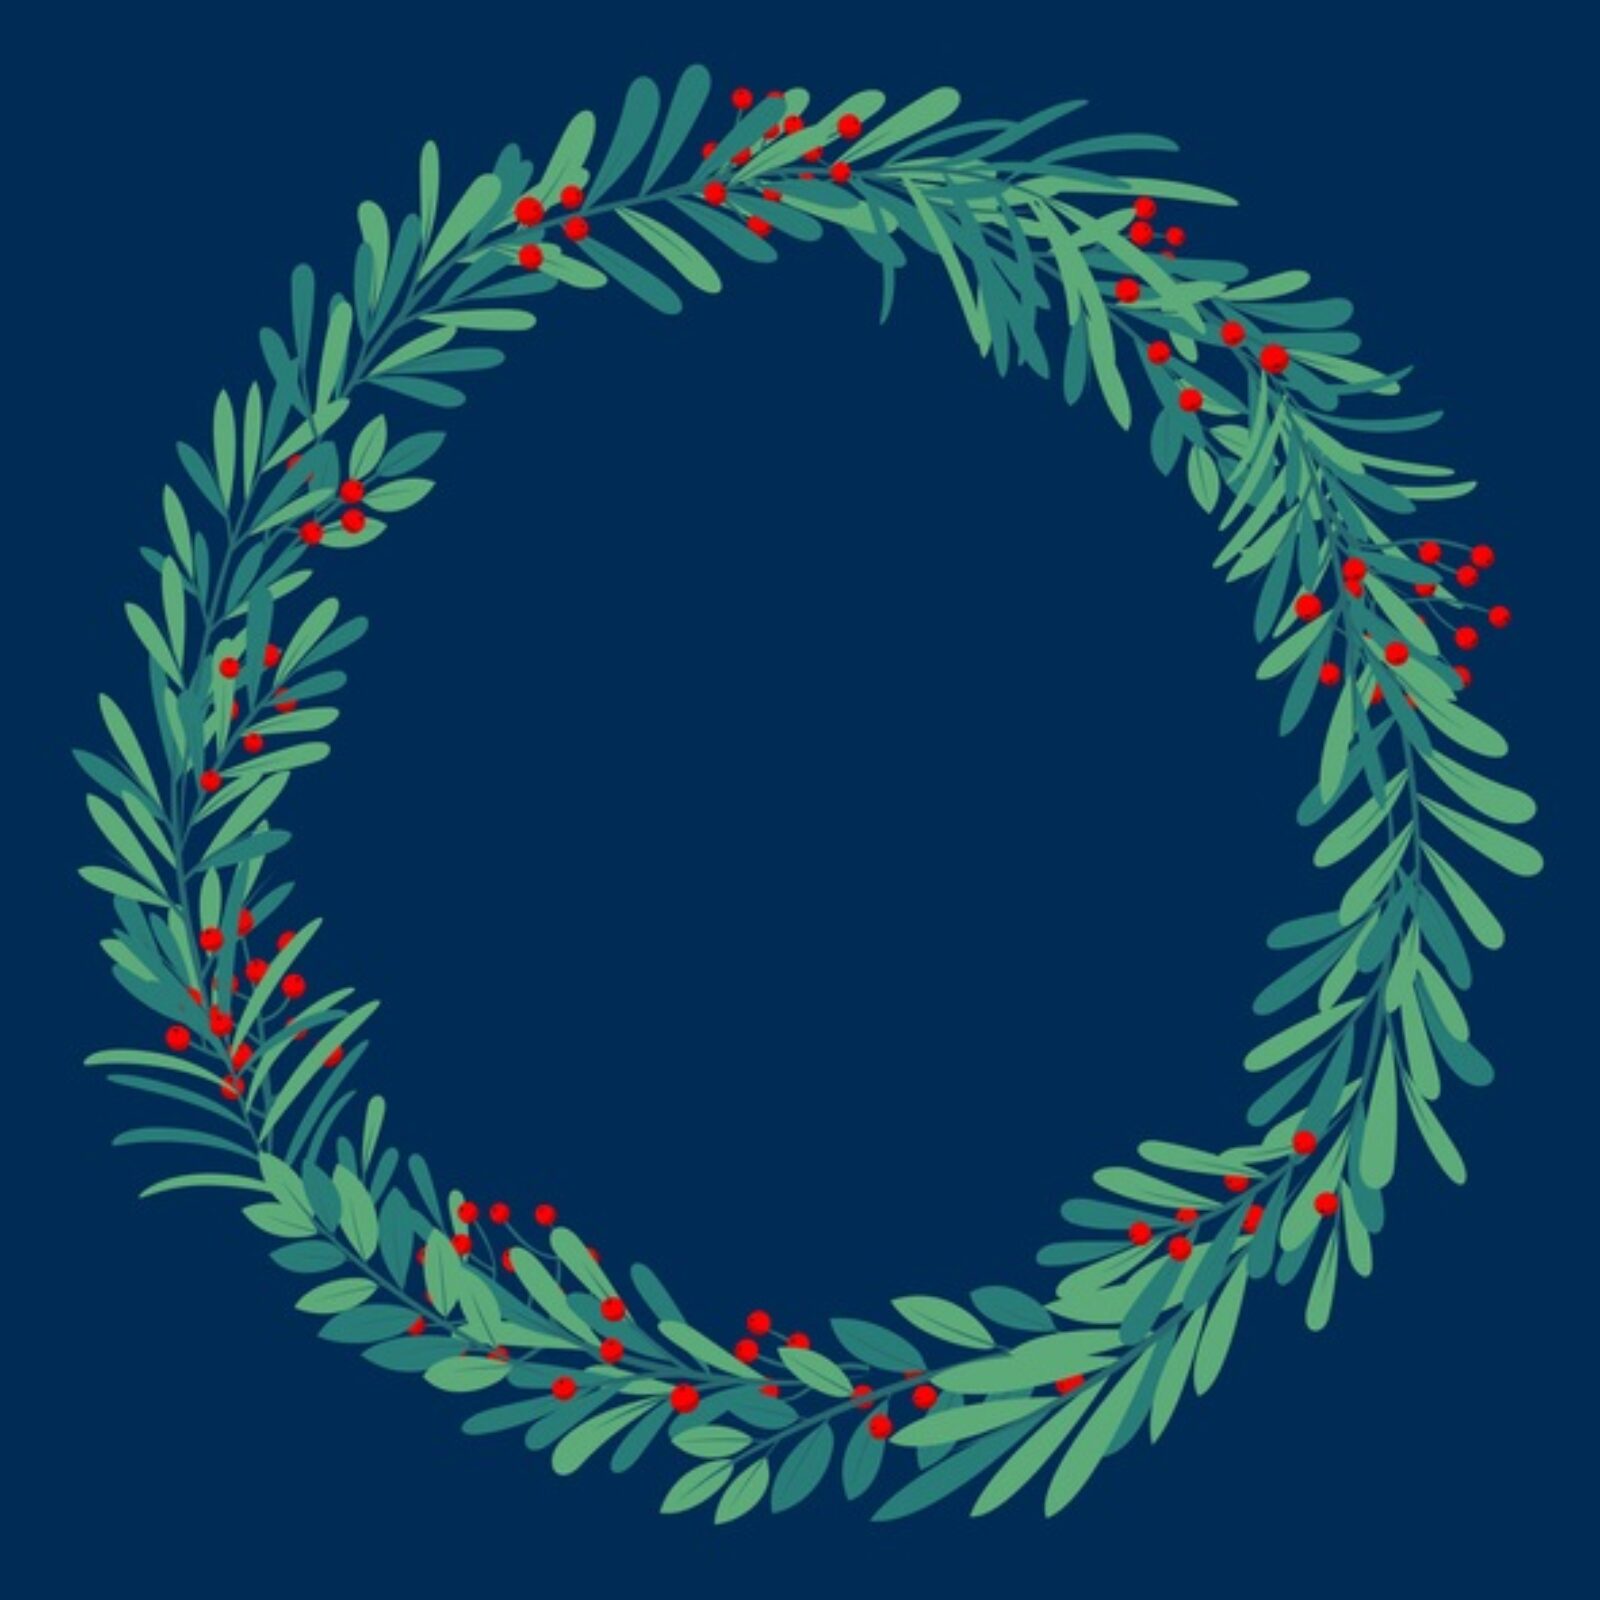 Wreaths of Joy – get your tickets now!